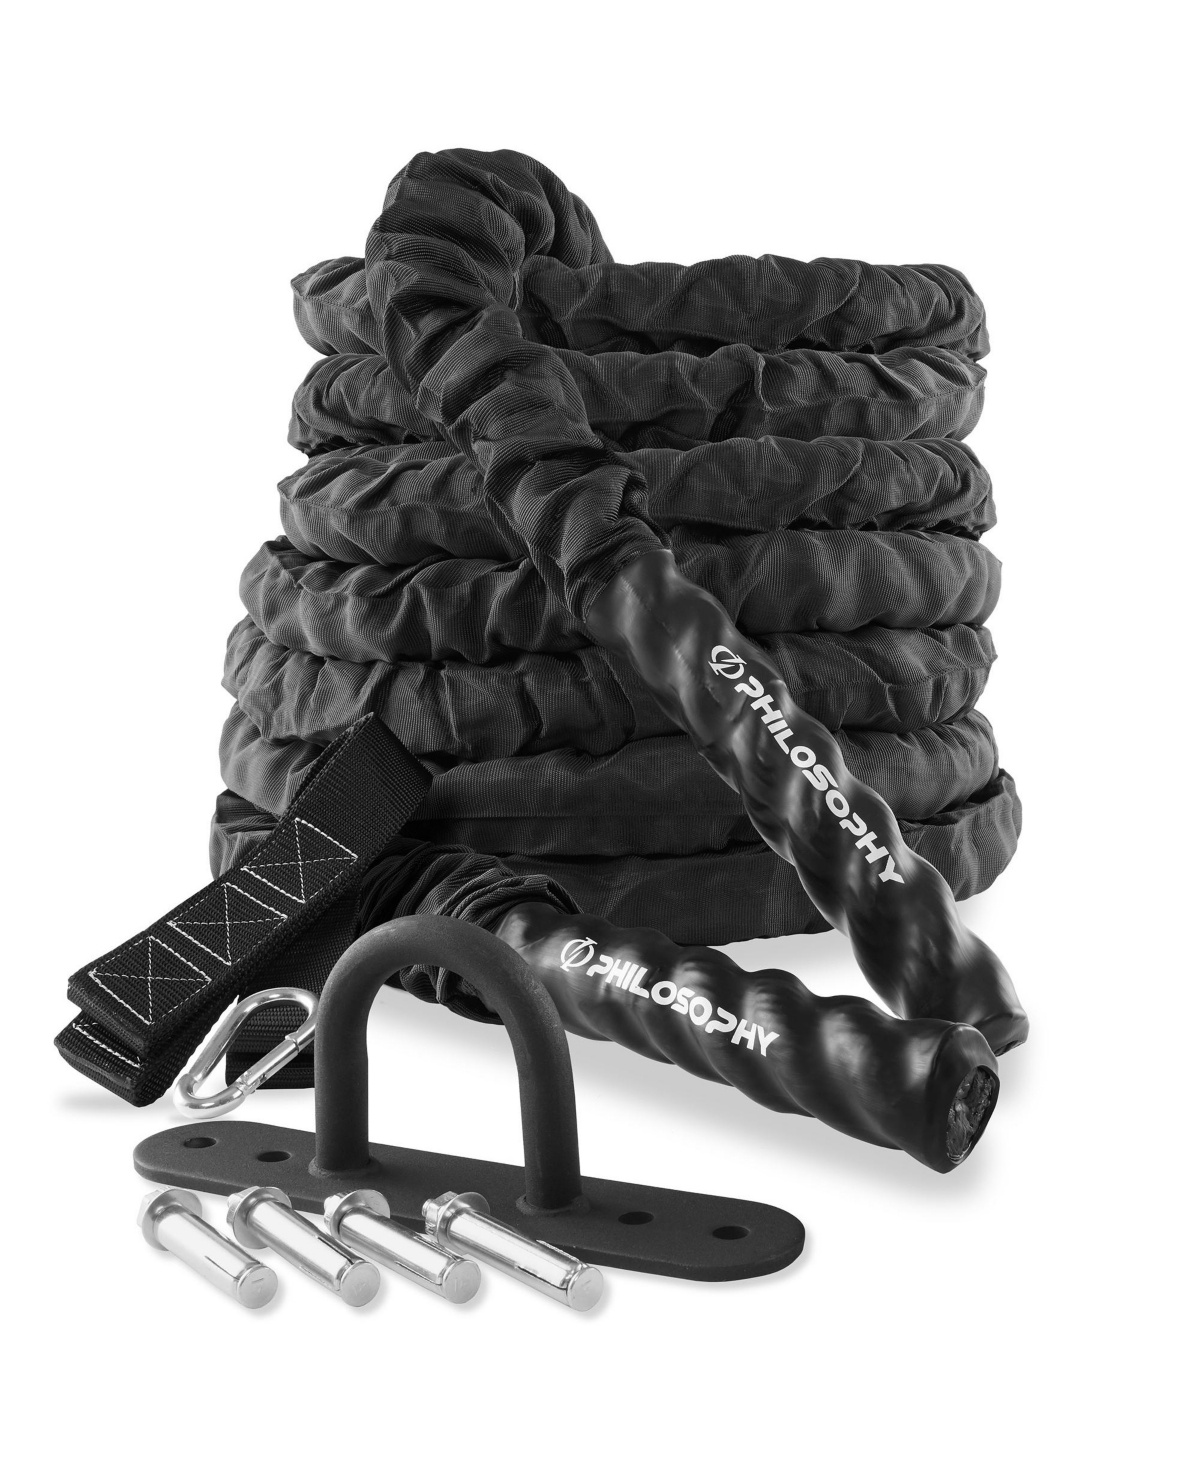 50 Foot Exercise Battle Rope 1.5 Inch Diameter with Cover and Anchor Kit - Black